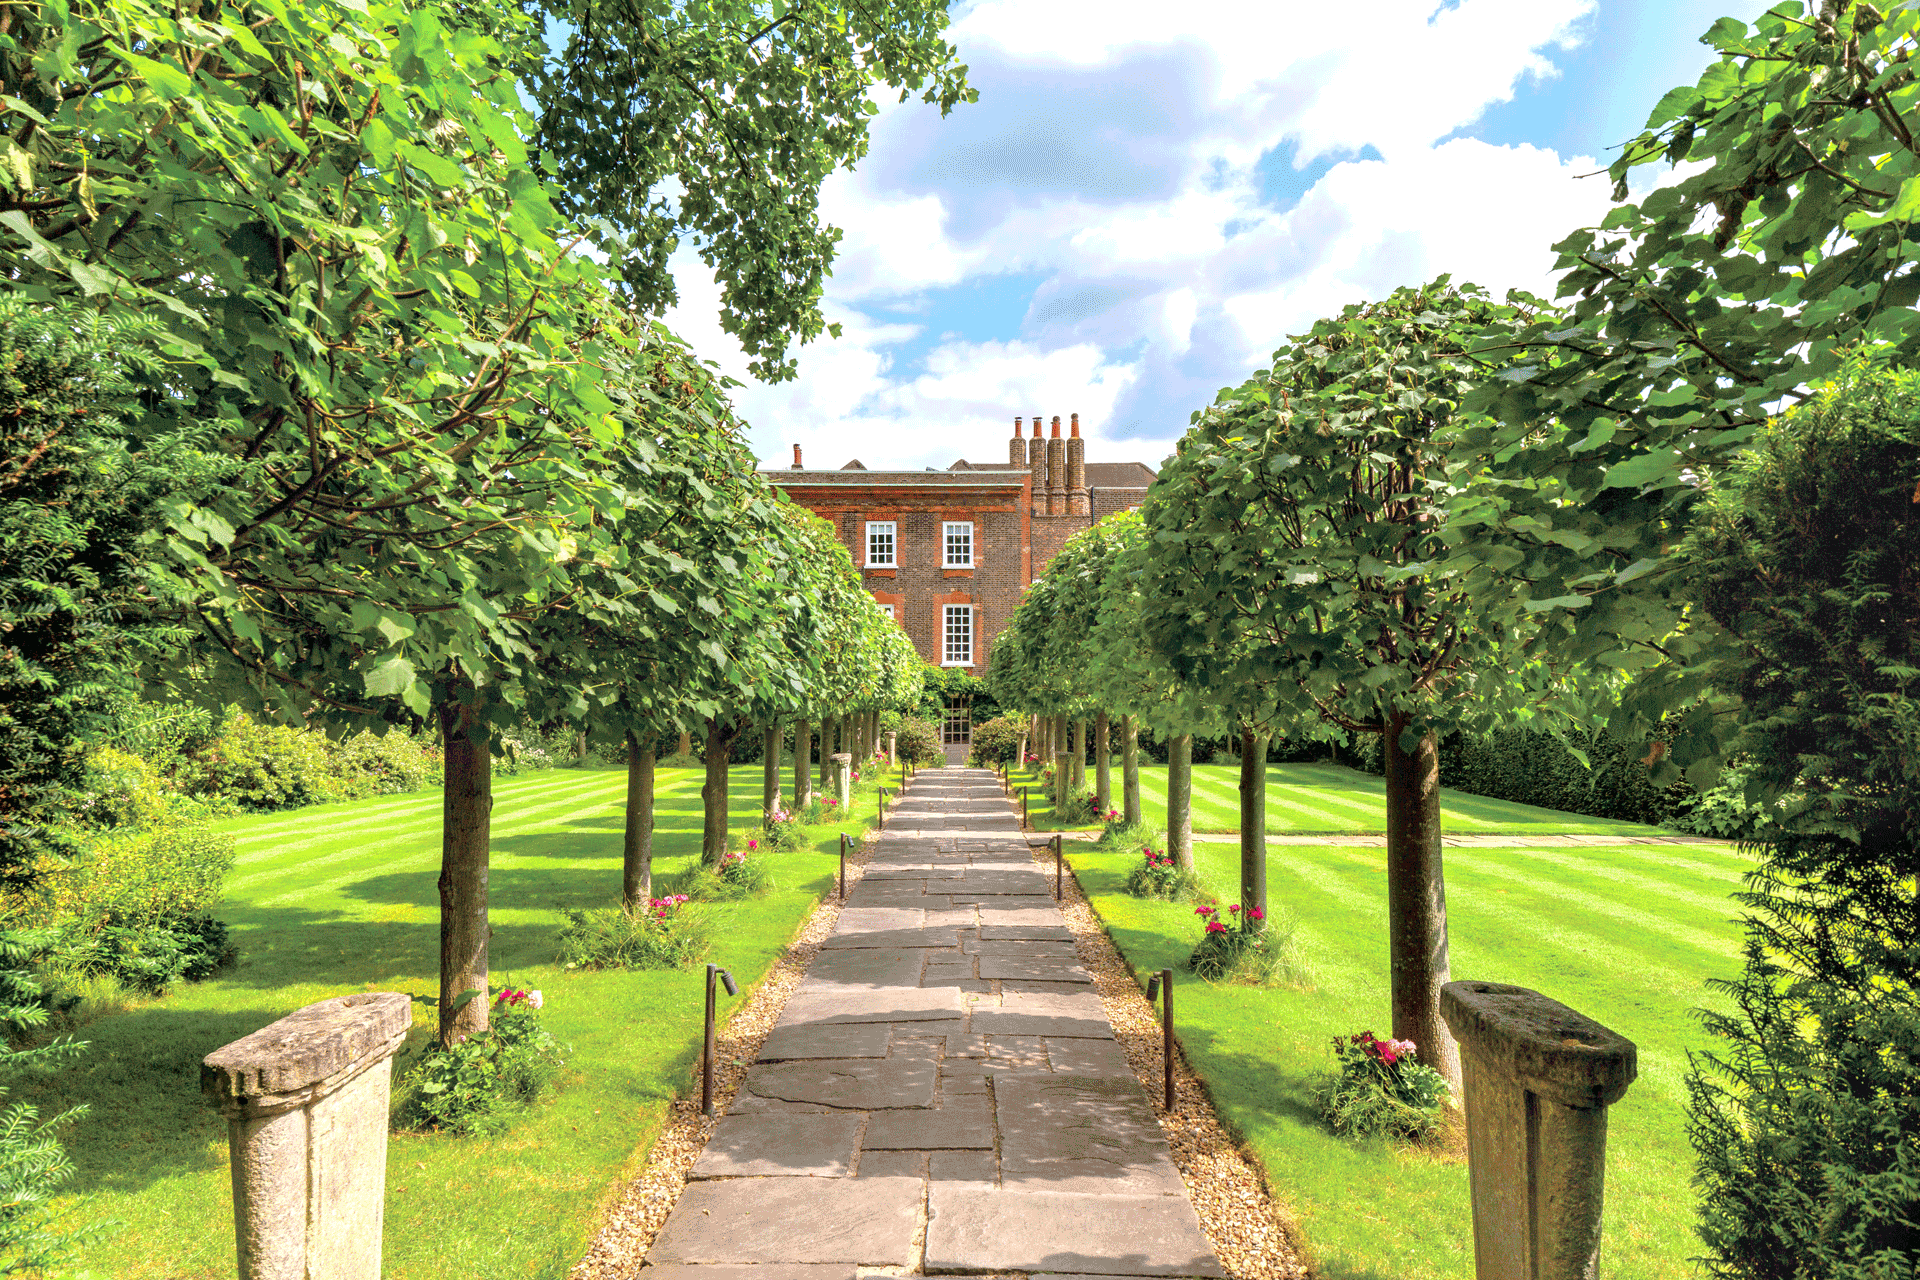 Grounds of Walpole House, featuring a long tree-lined drive